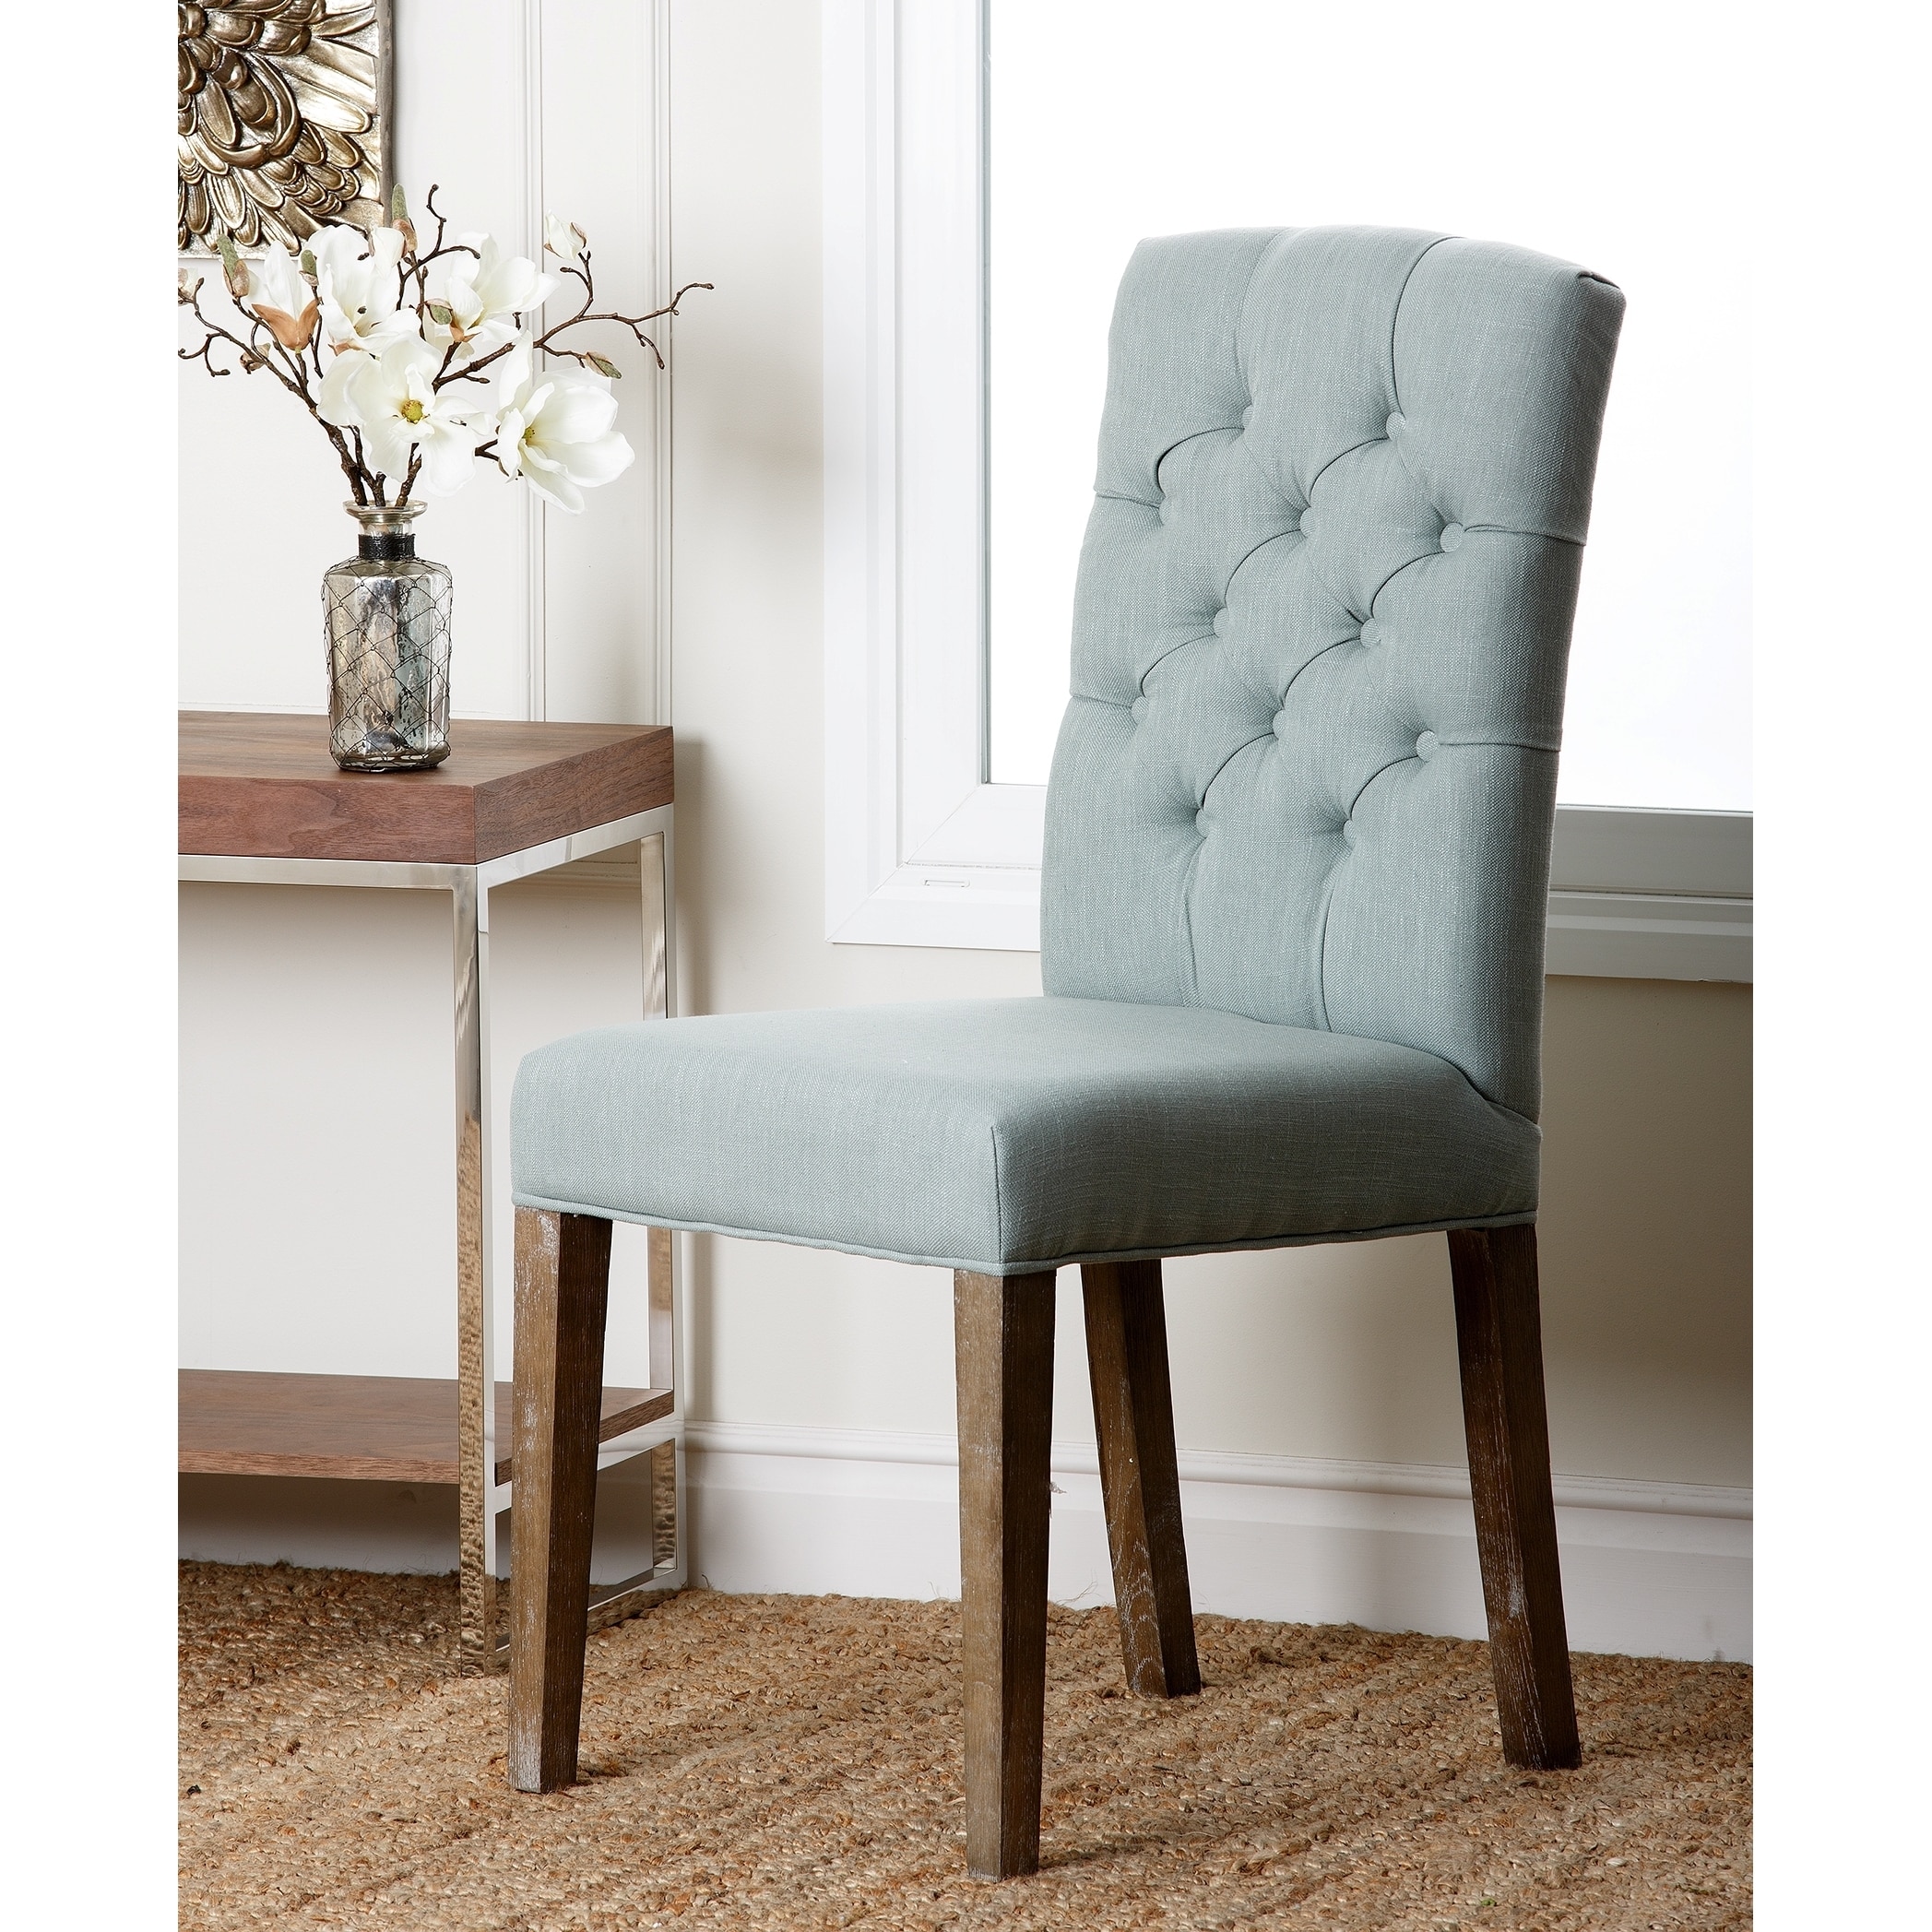 Our Best Dining Room & Bar Furniture Deals | Fabric dining chairs